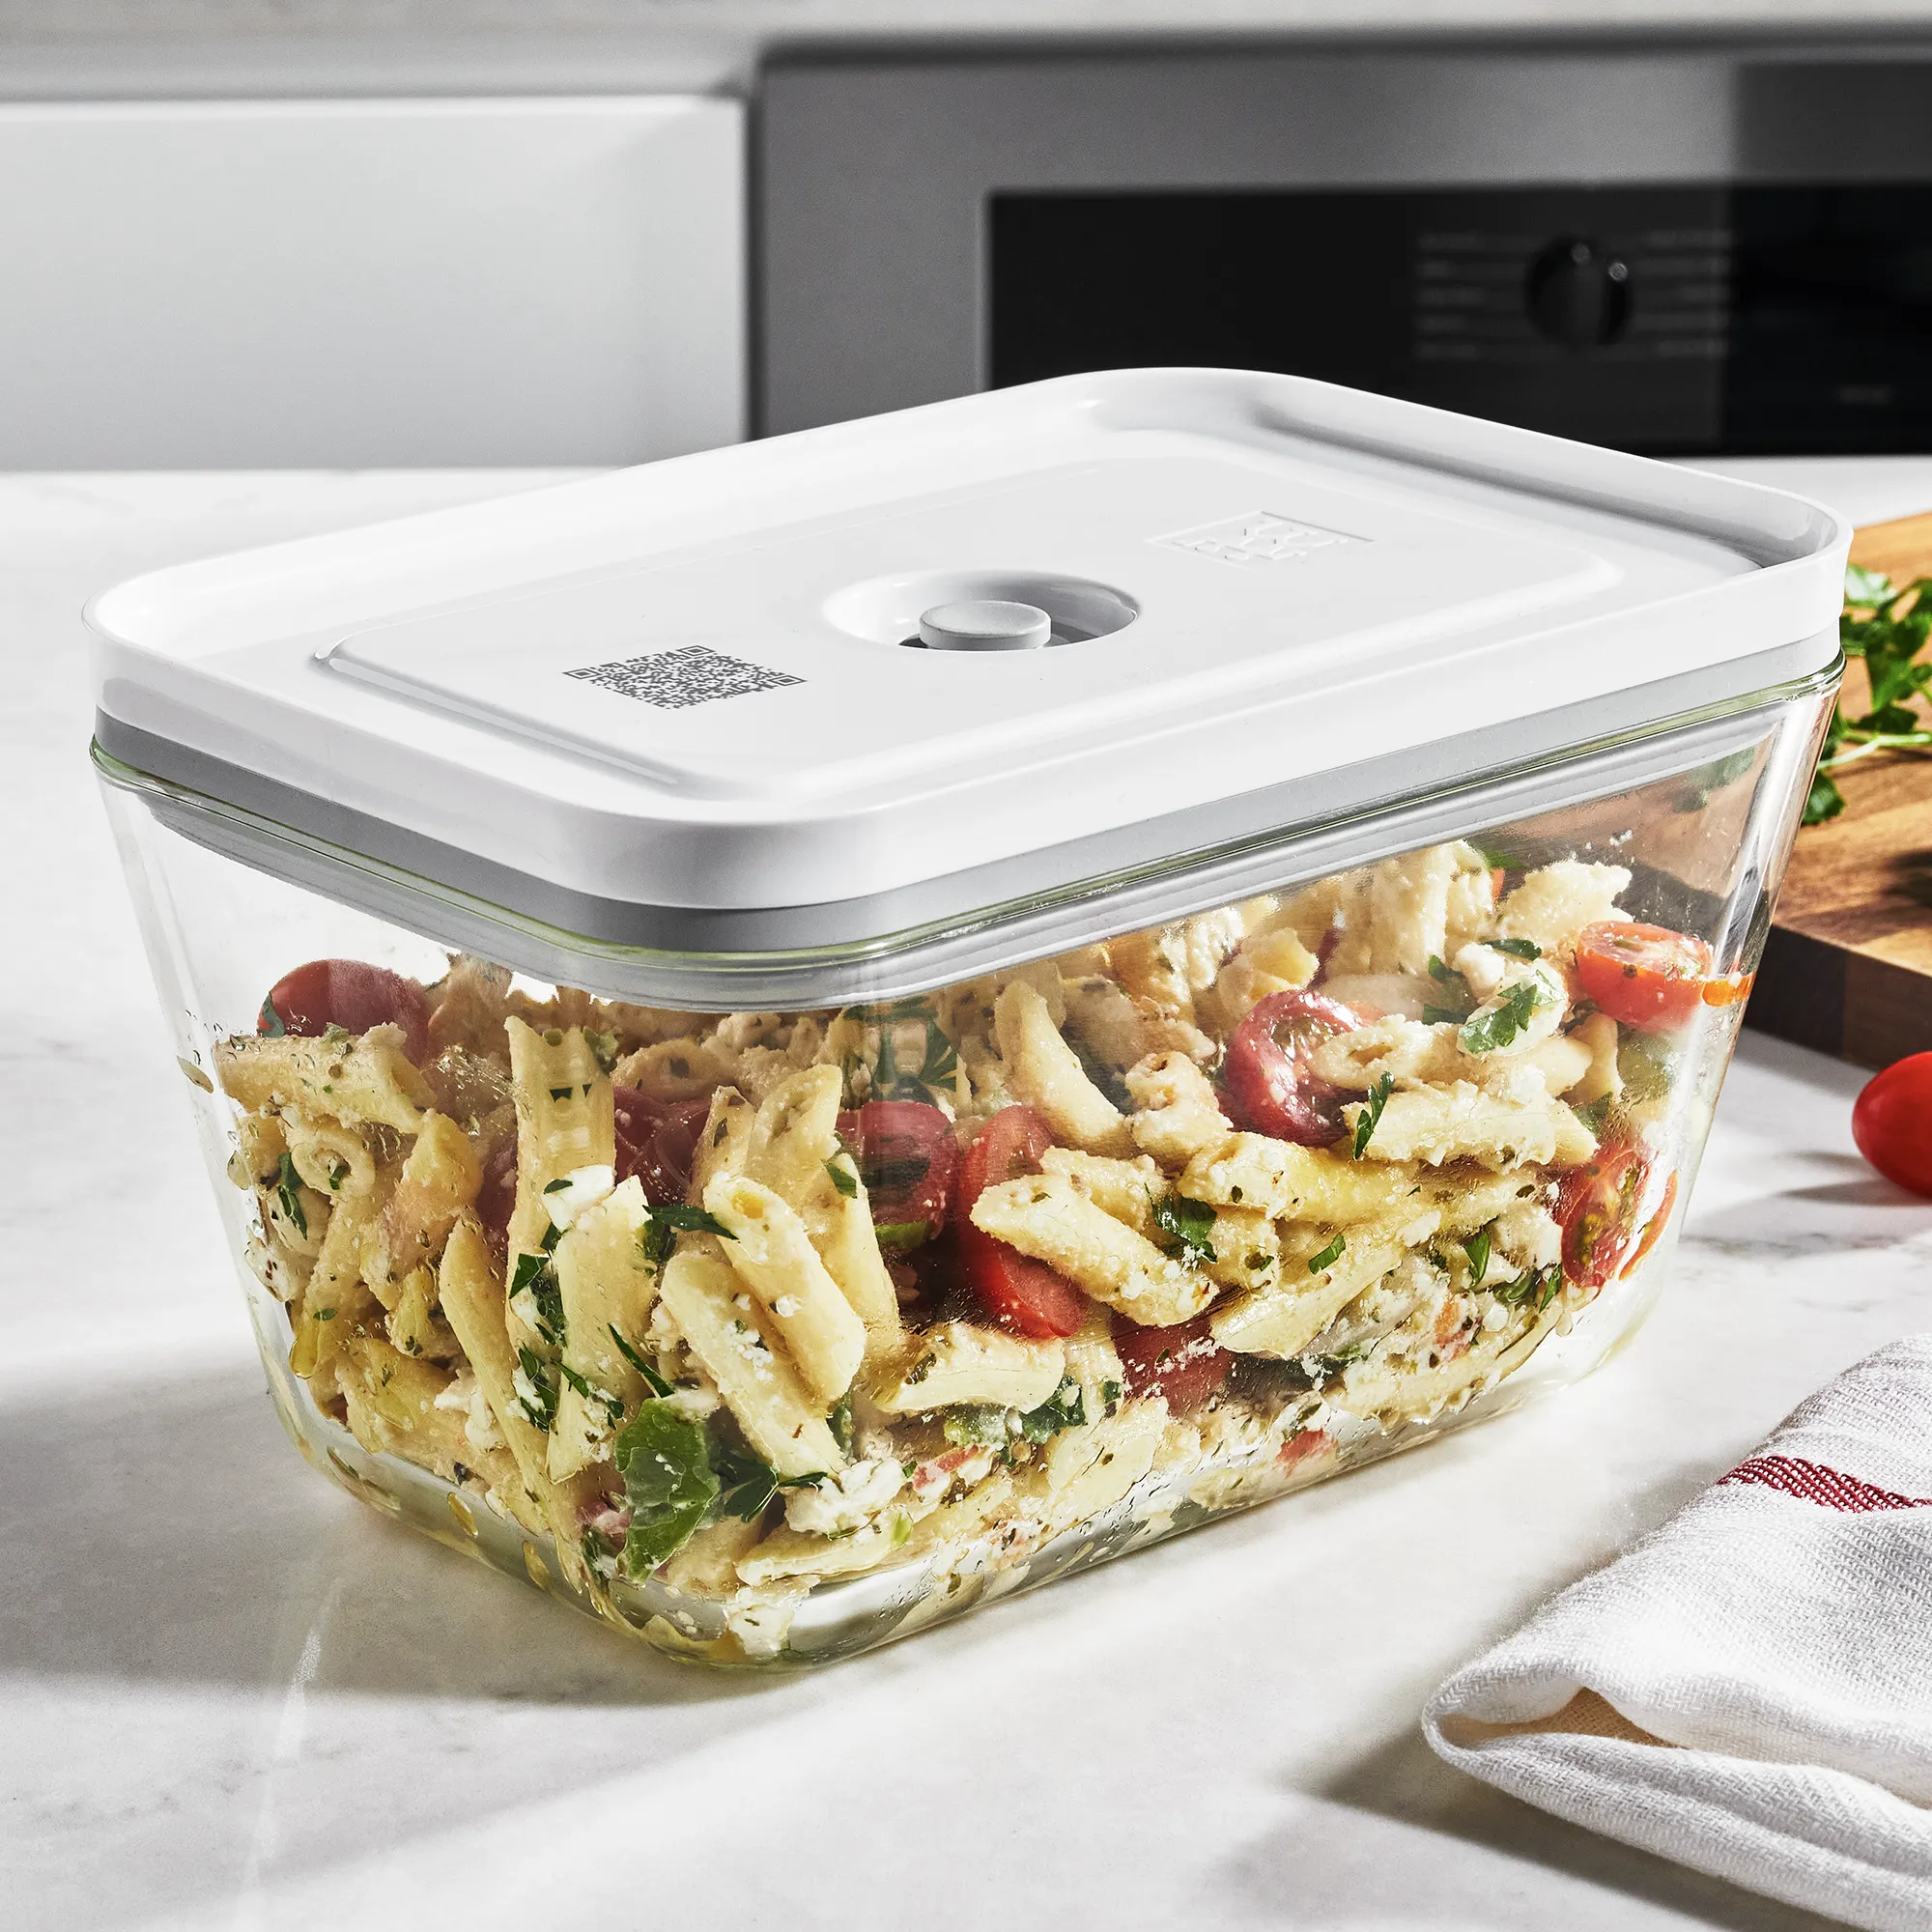 https://www.homethreads.com/files/zwilling/1002497-zwilling-fresh-save-glass-airtight-food-storage-container-meal-prep-container-large-3.webp